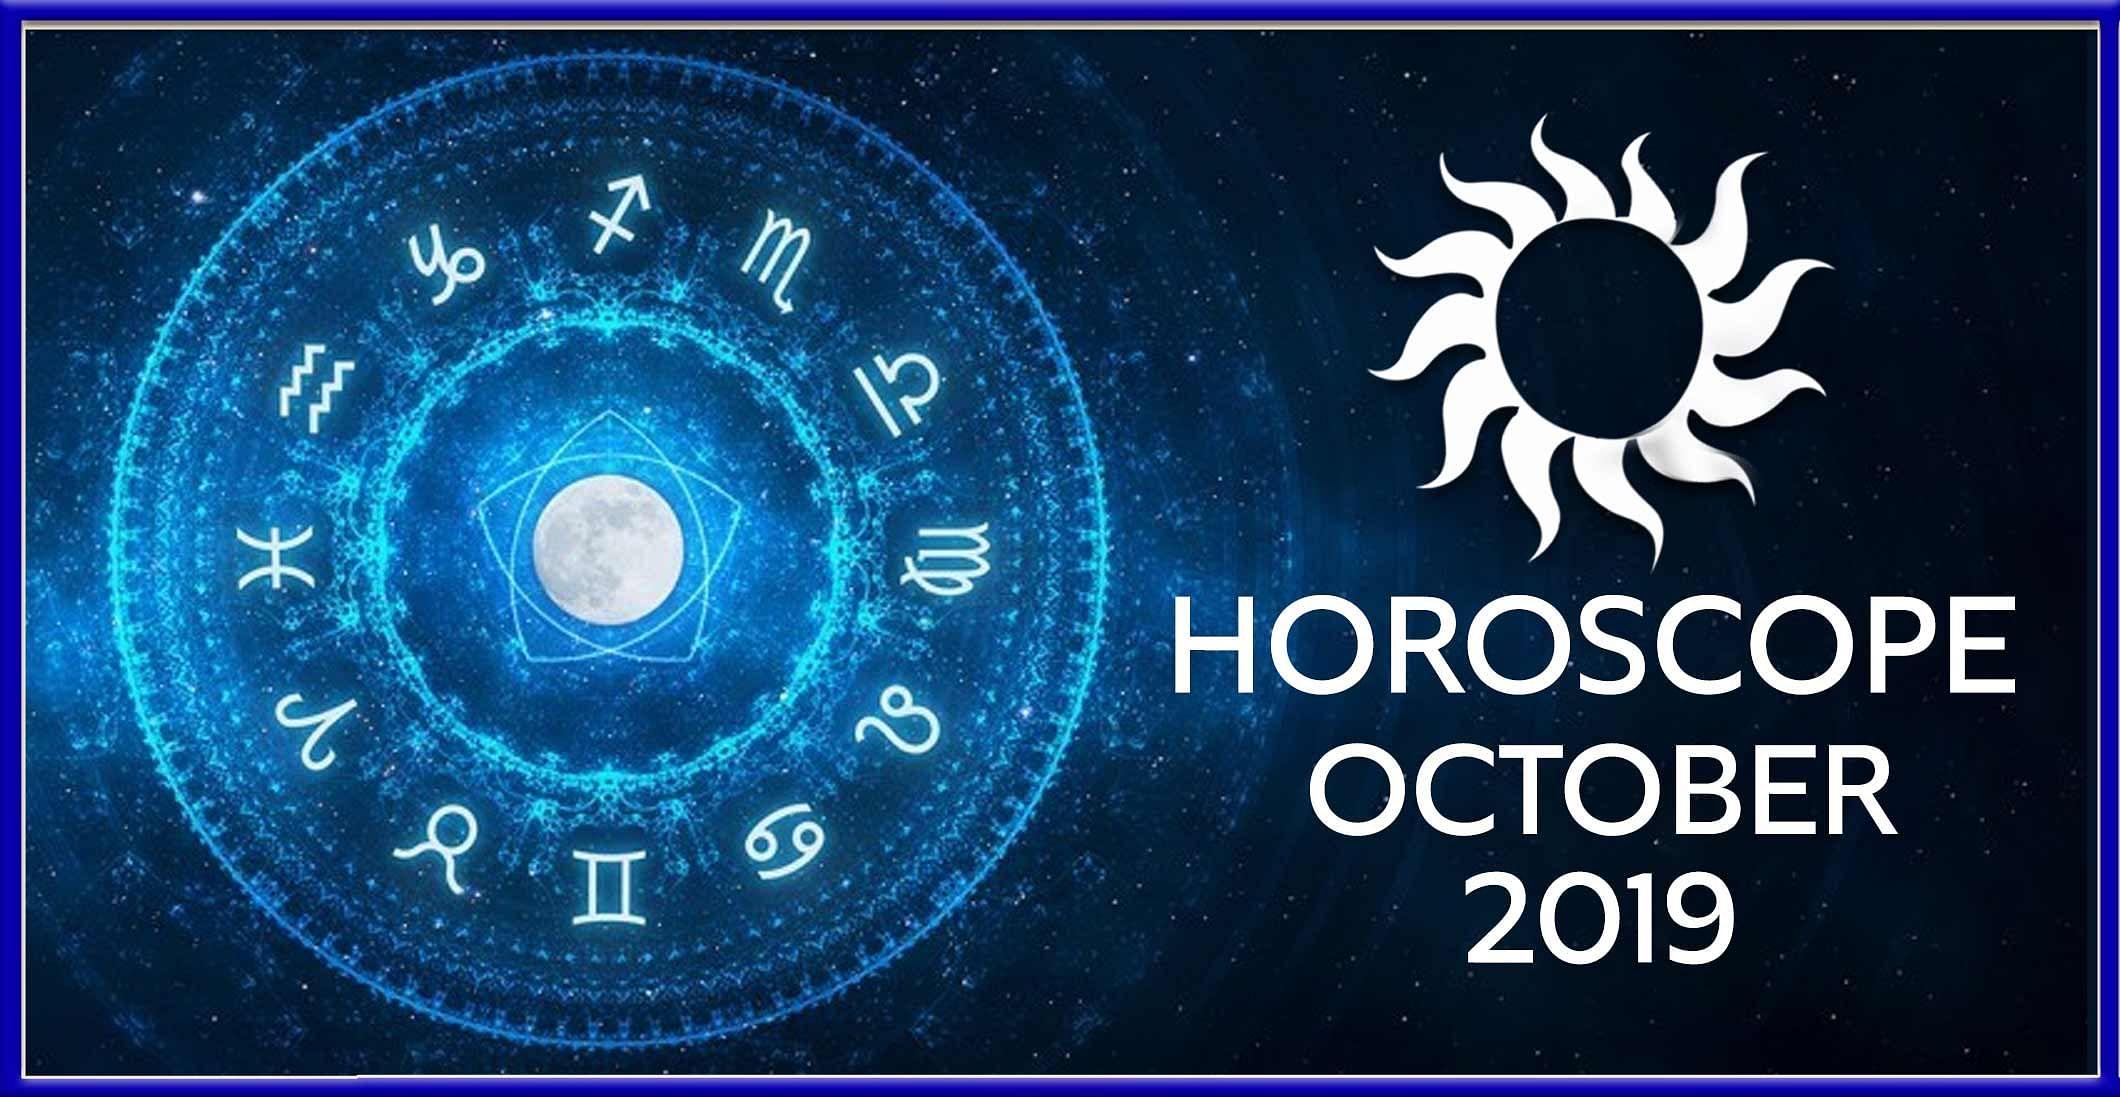 YOUR MONTHLY HOROSCOPE: OCTOBER 2019